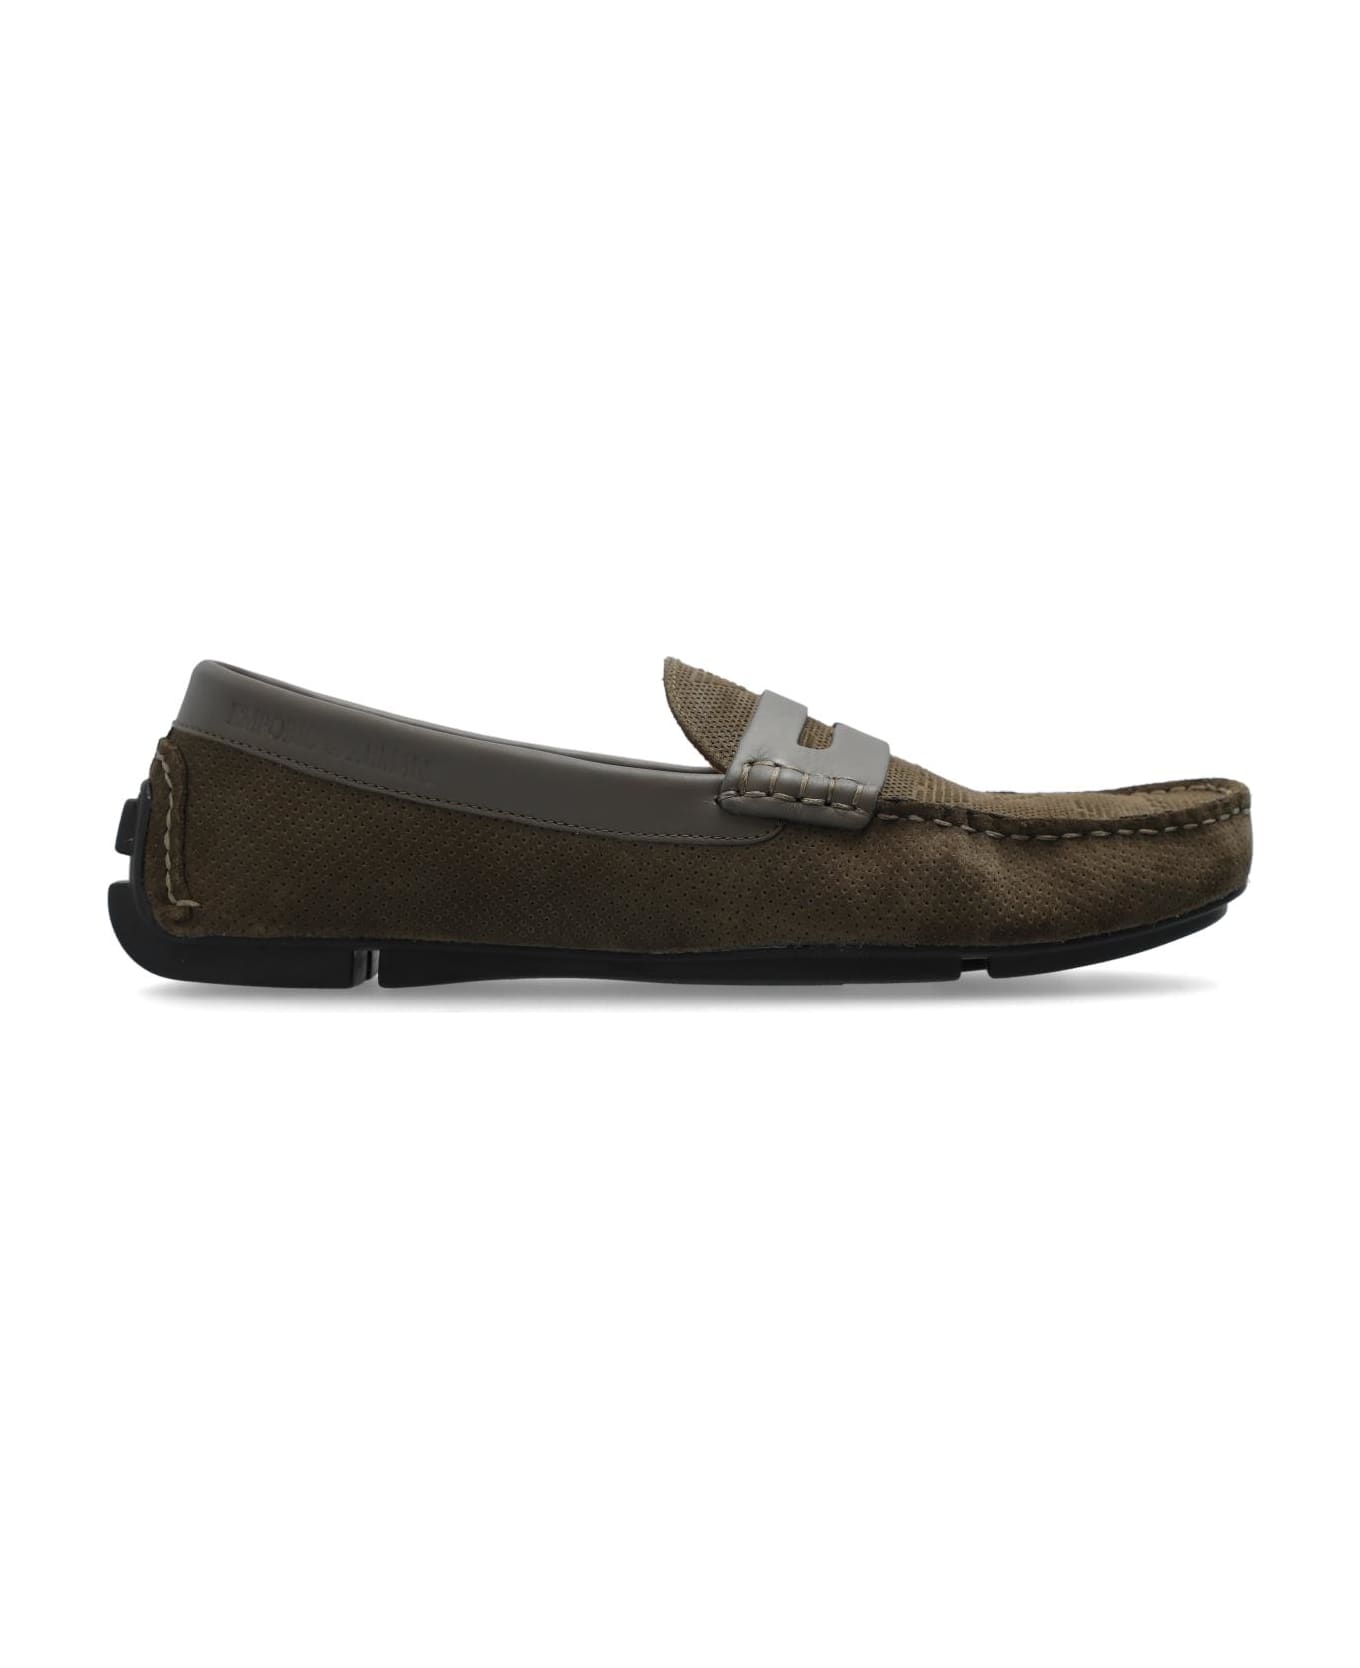 Emporio Armani Leather Loafers - Brown ローファー＆デッキシューズ